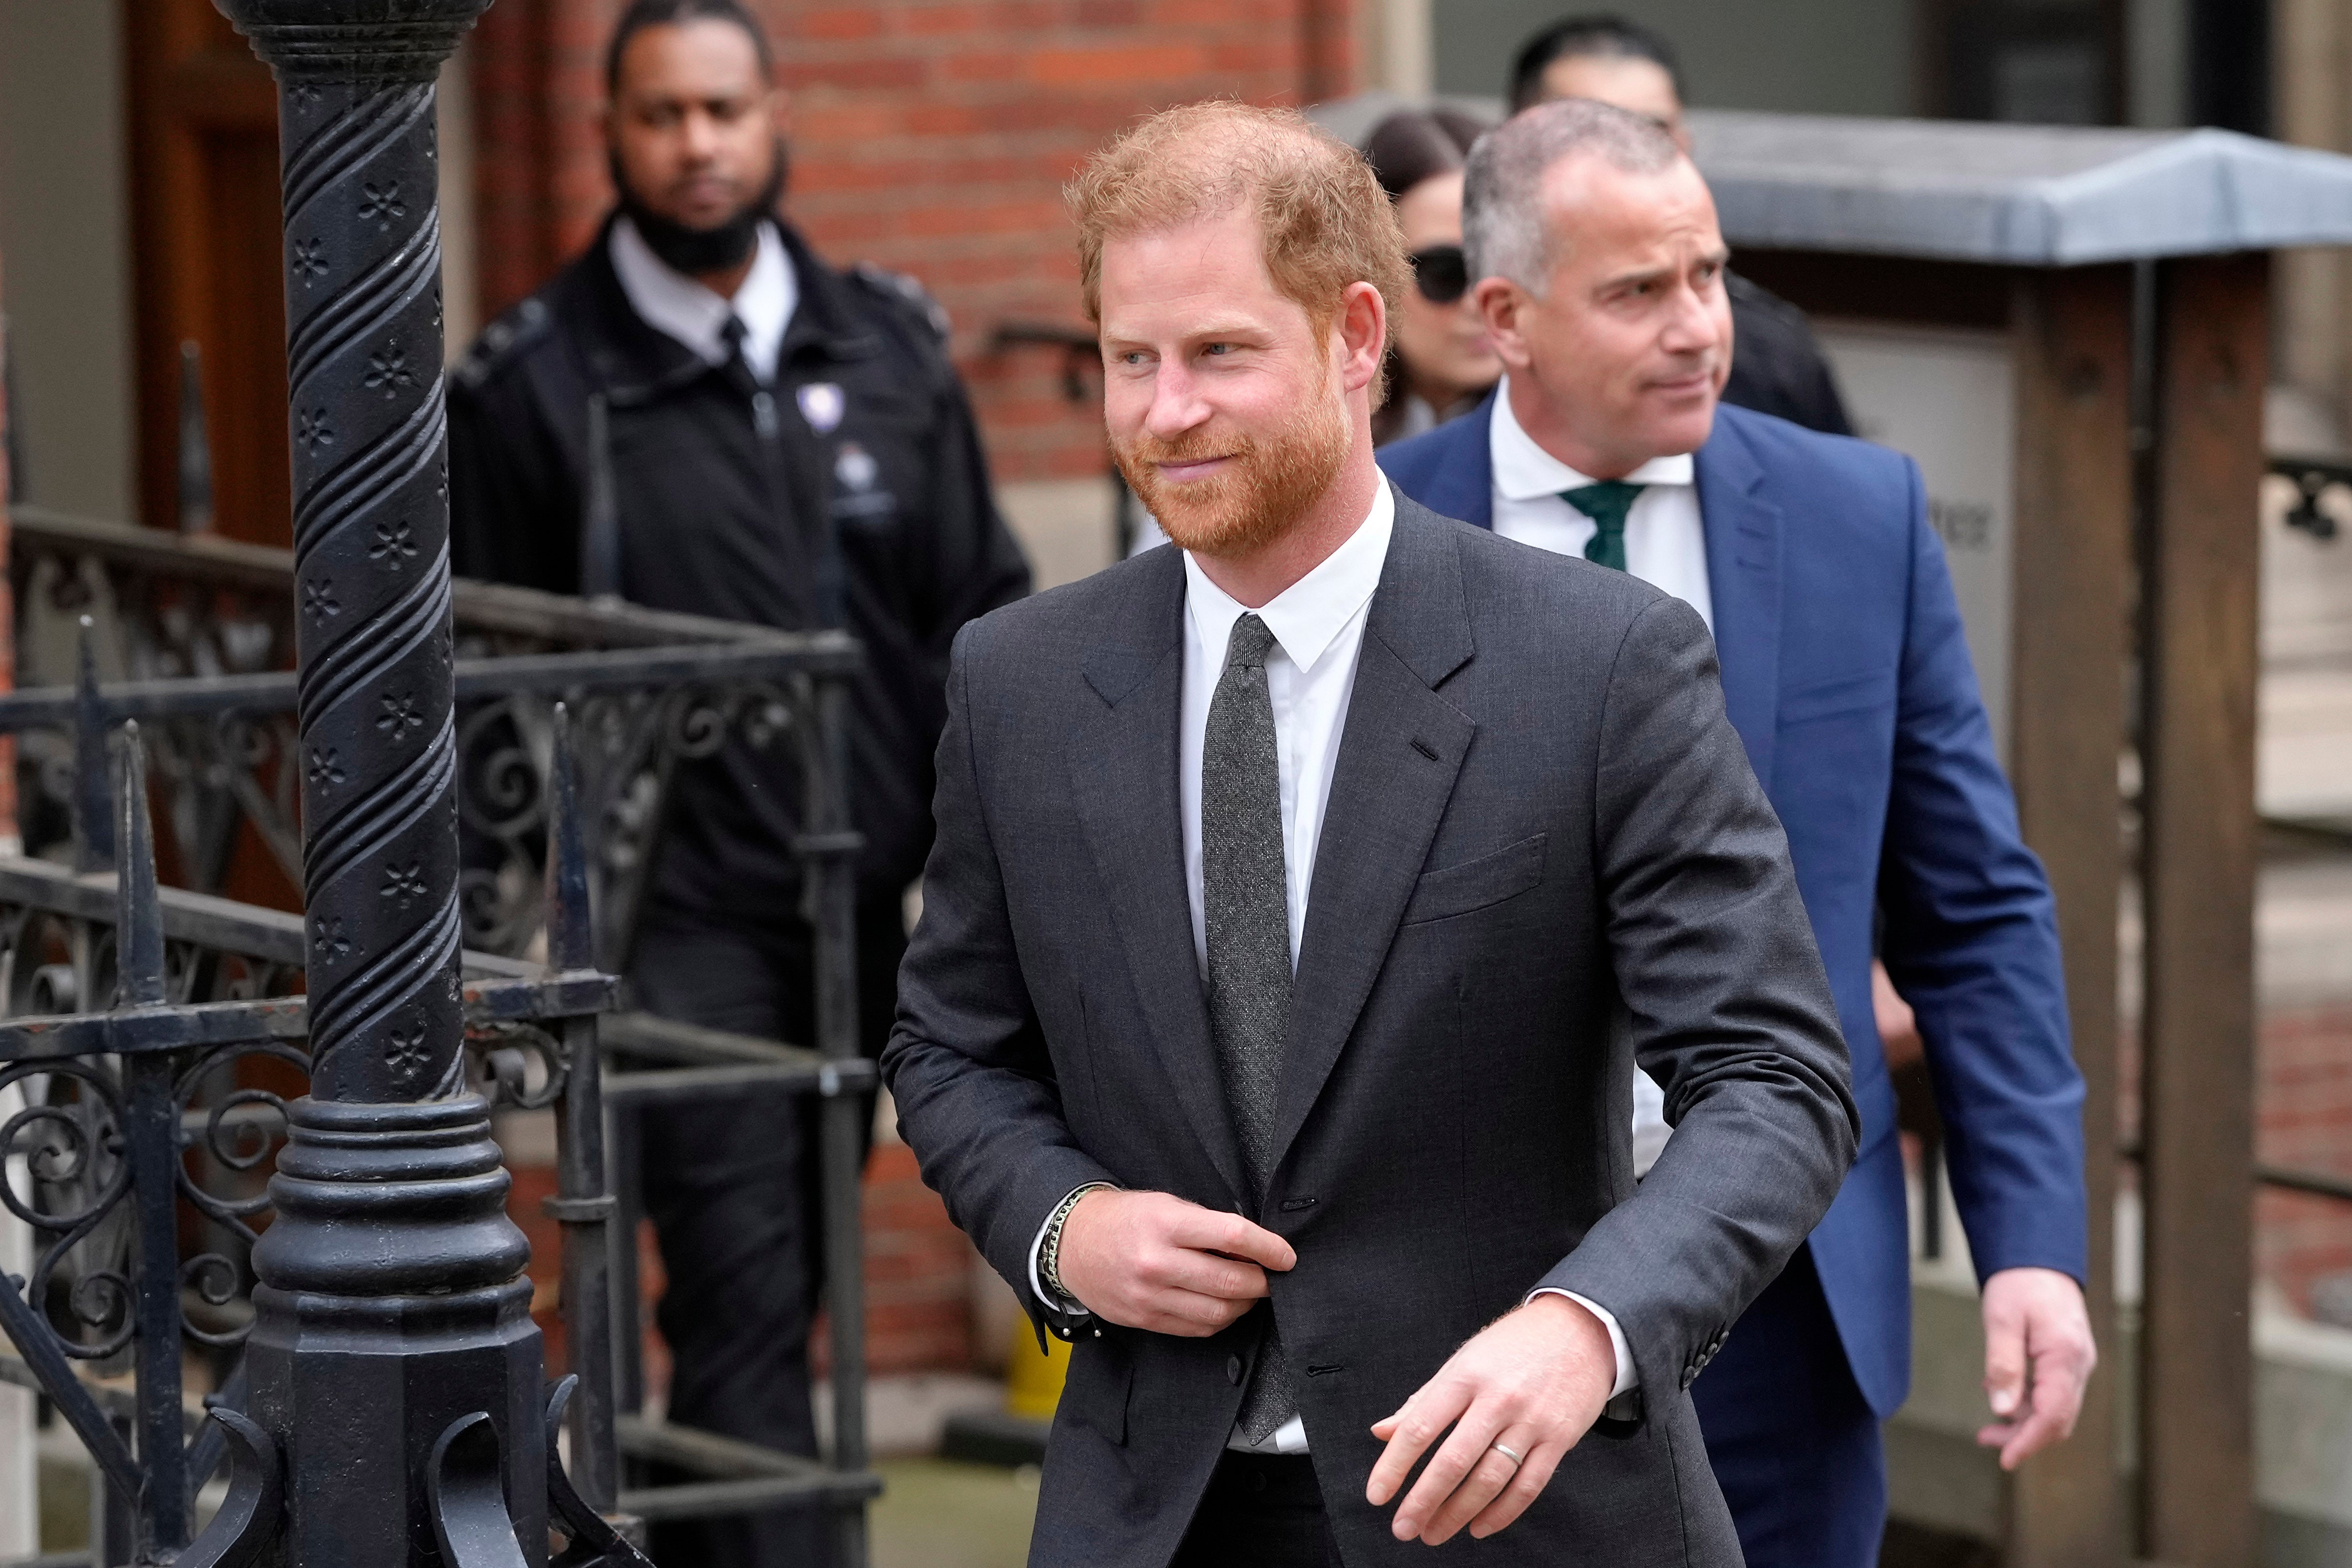 High legal costs could force Prince Harry to settle out of court